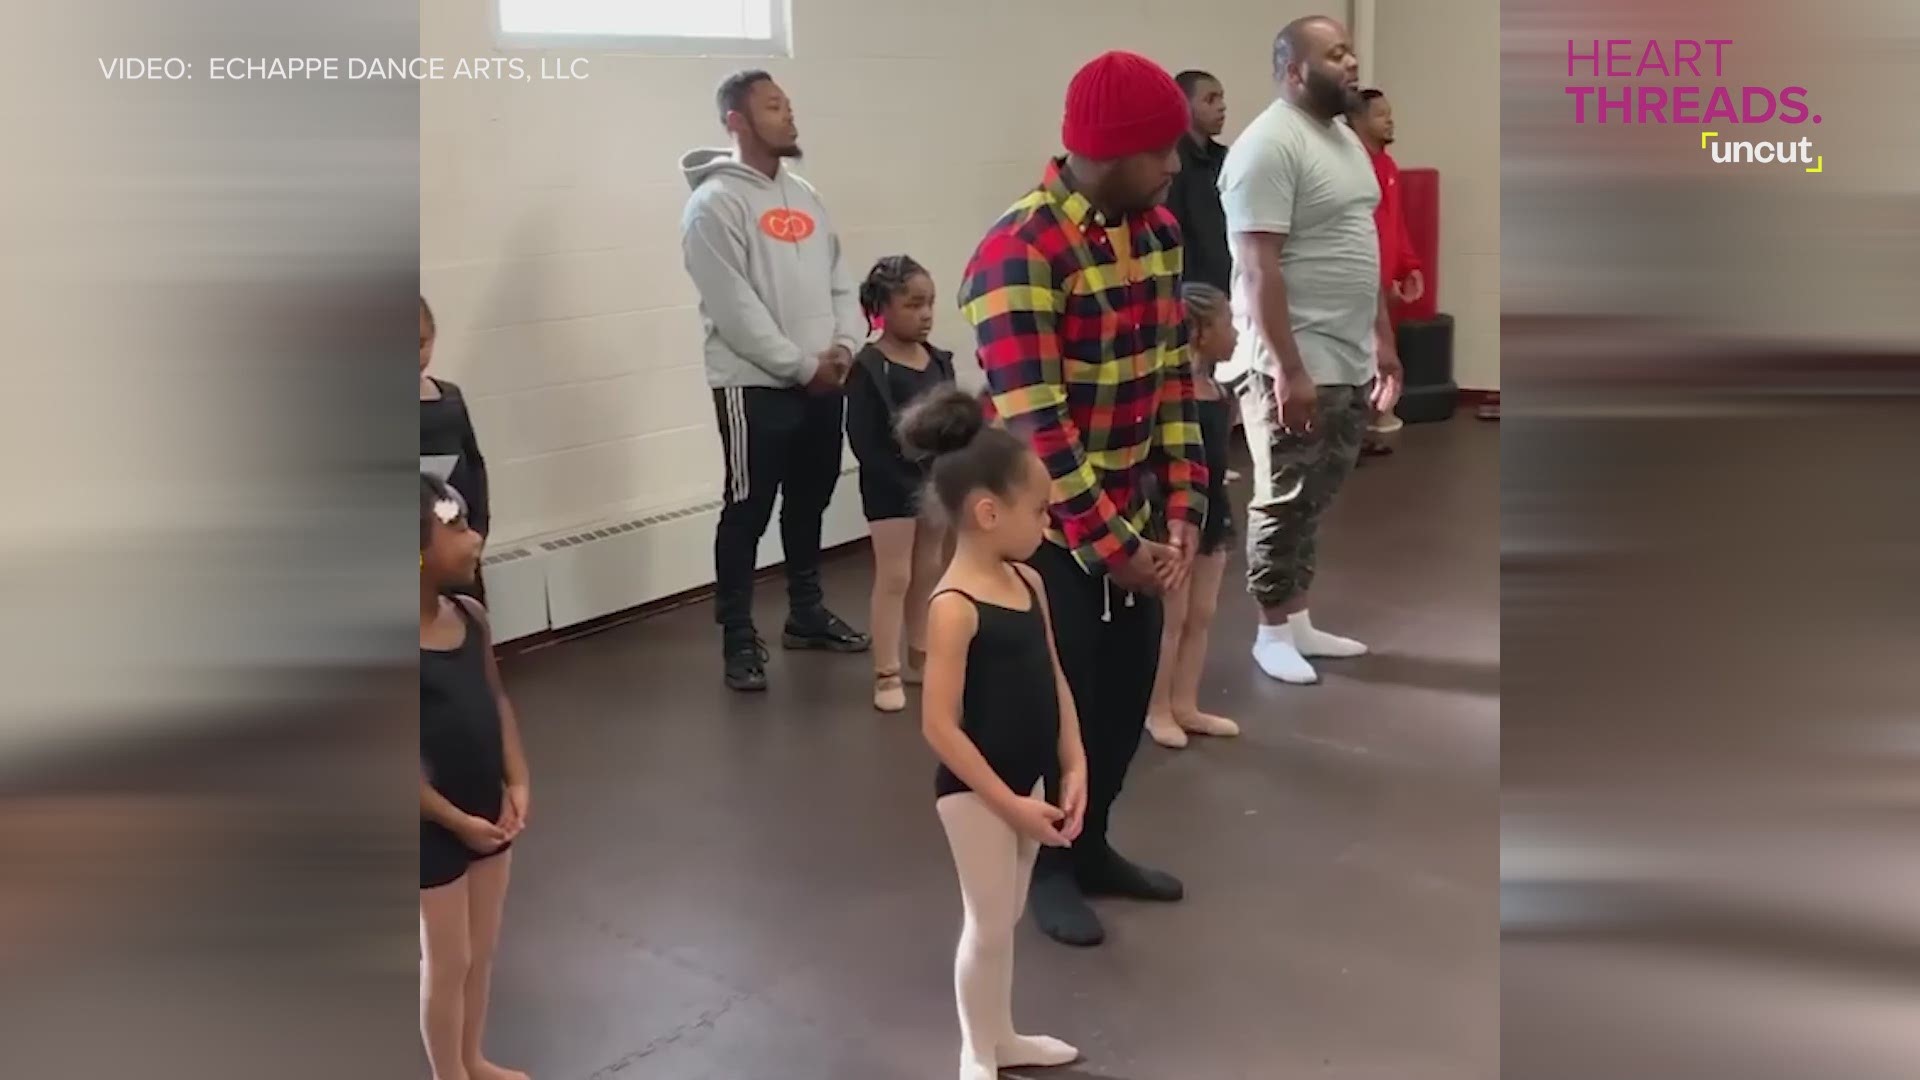 These dads busted out their best moves for a daddy-daughter ballet class and it's adorable.